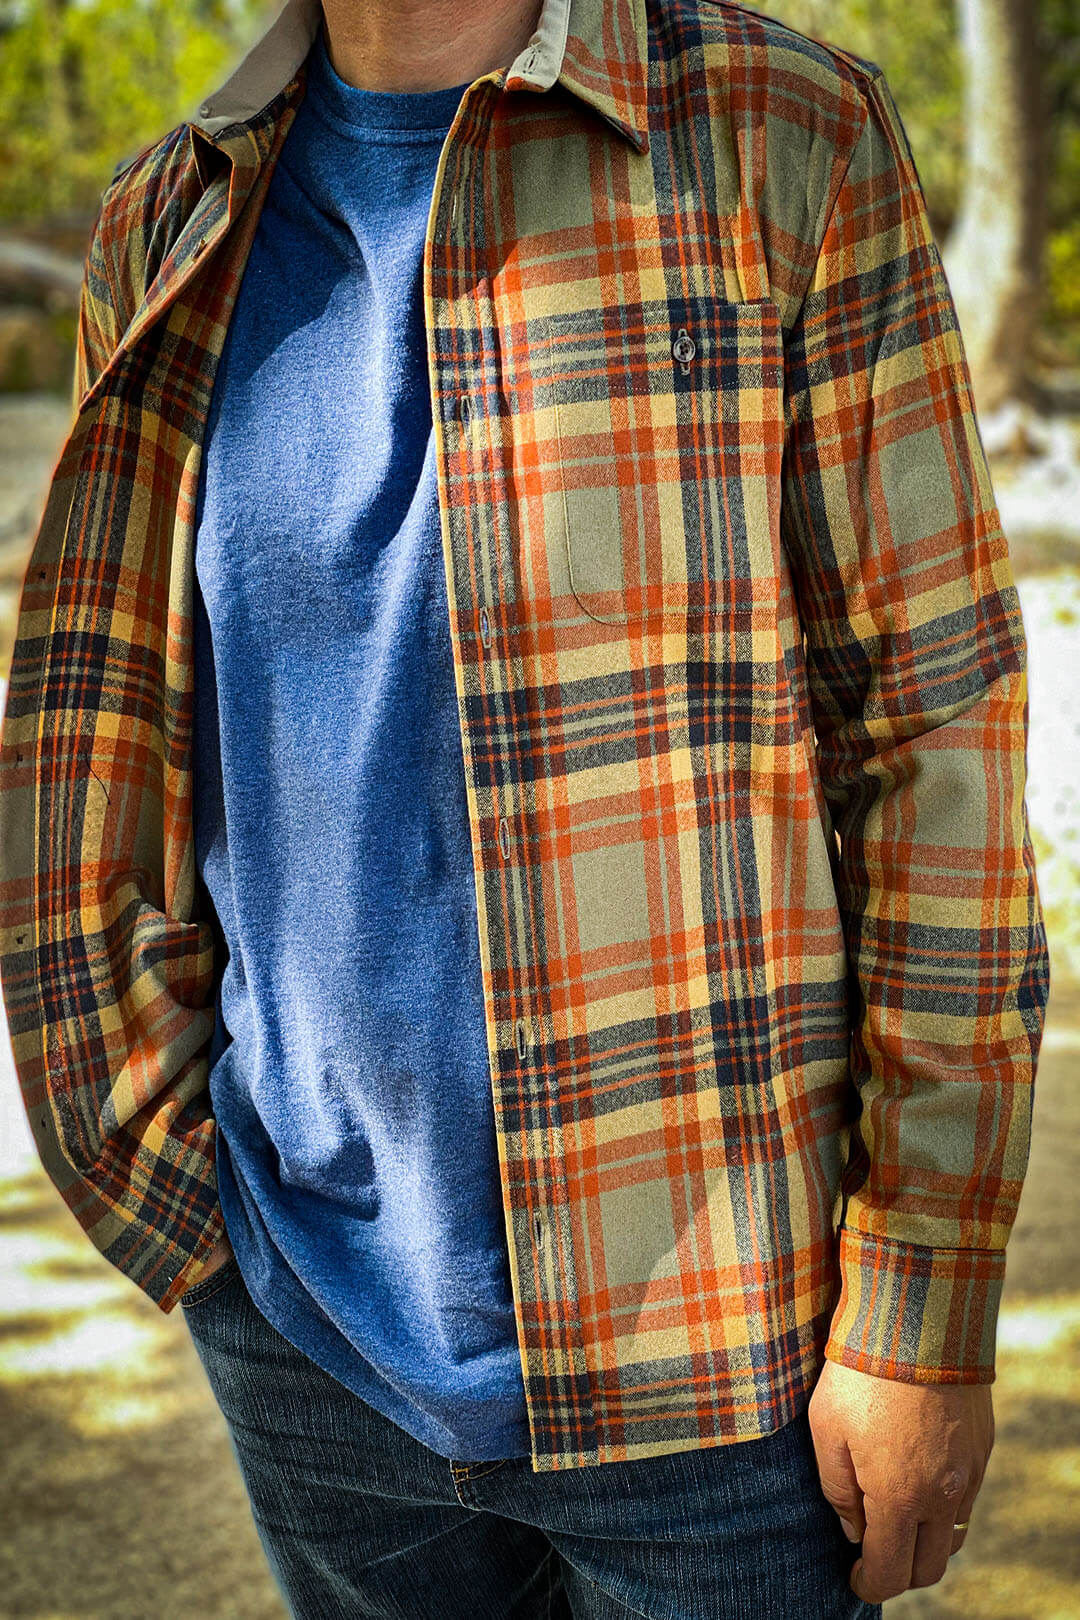 Pendleton Trail long sleeve shirt with buttons has orange mustard and navy blue striped 